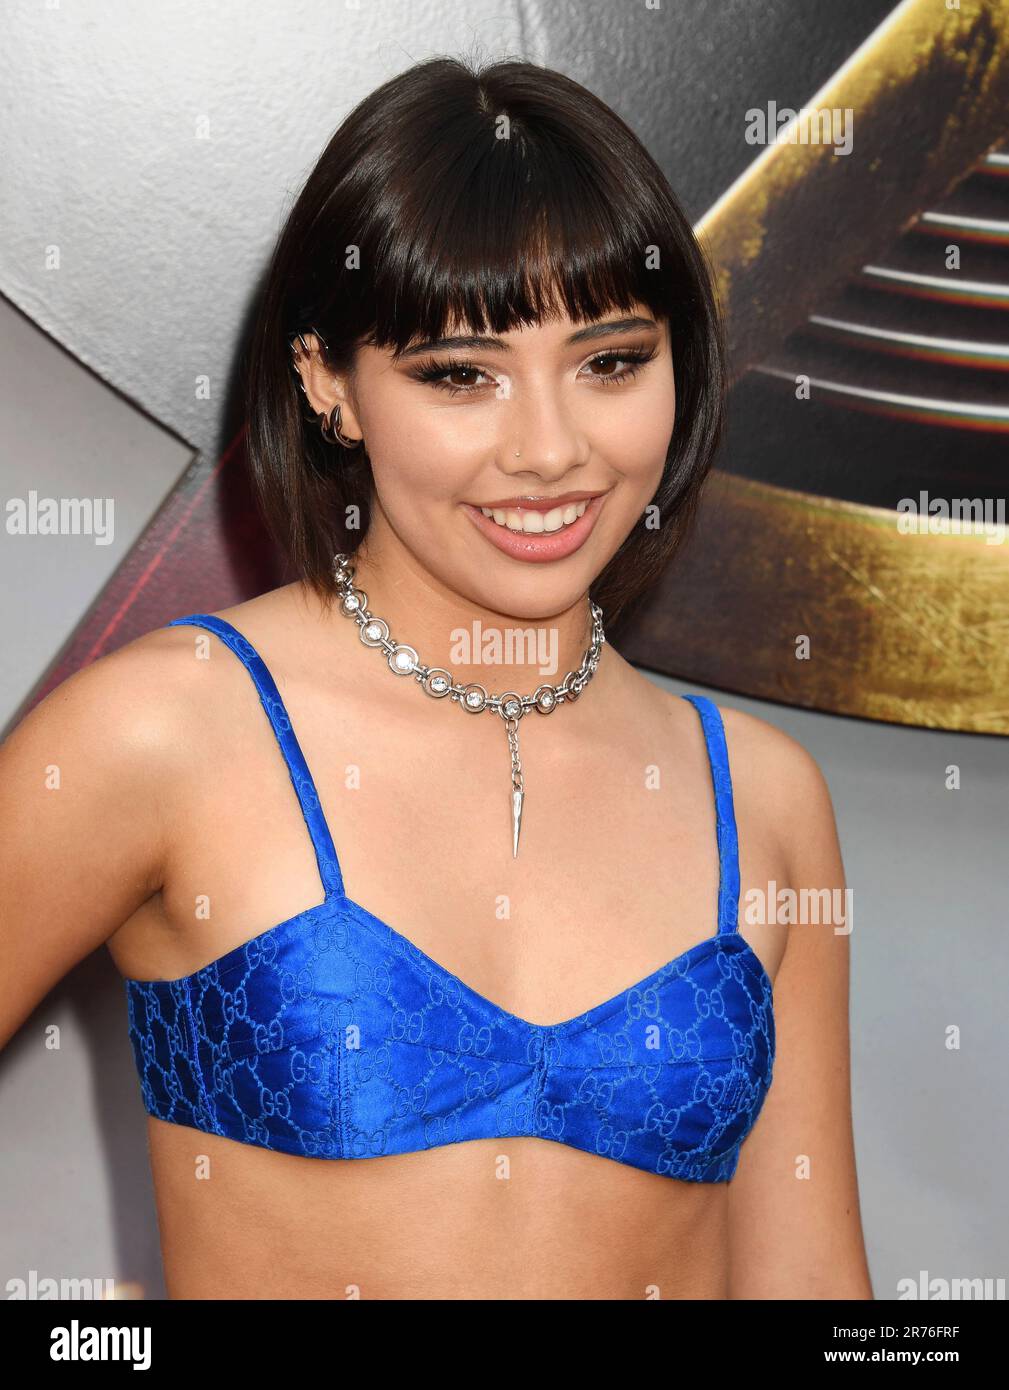 Hollywood, California, USA. 12th June, 2023. Xochitl Gomez attends the Los Angeles premiere of Warner Bros. 'The Flash' at Ovation Hollywood on June 12, 2023 in Hollywood, California. Credit: Jeffrey Mayer/Jtm Photos/Media Punch/Alamy Live News Stock Photo